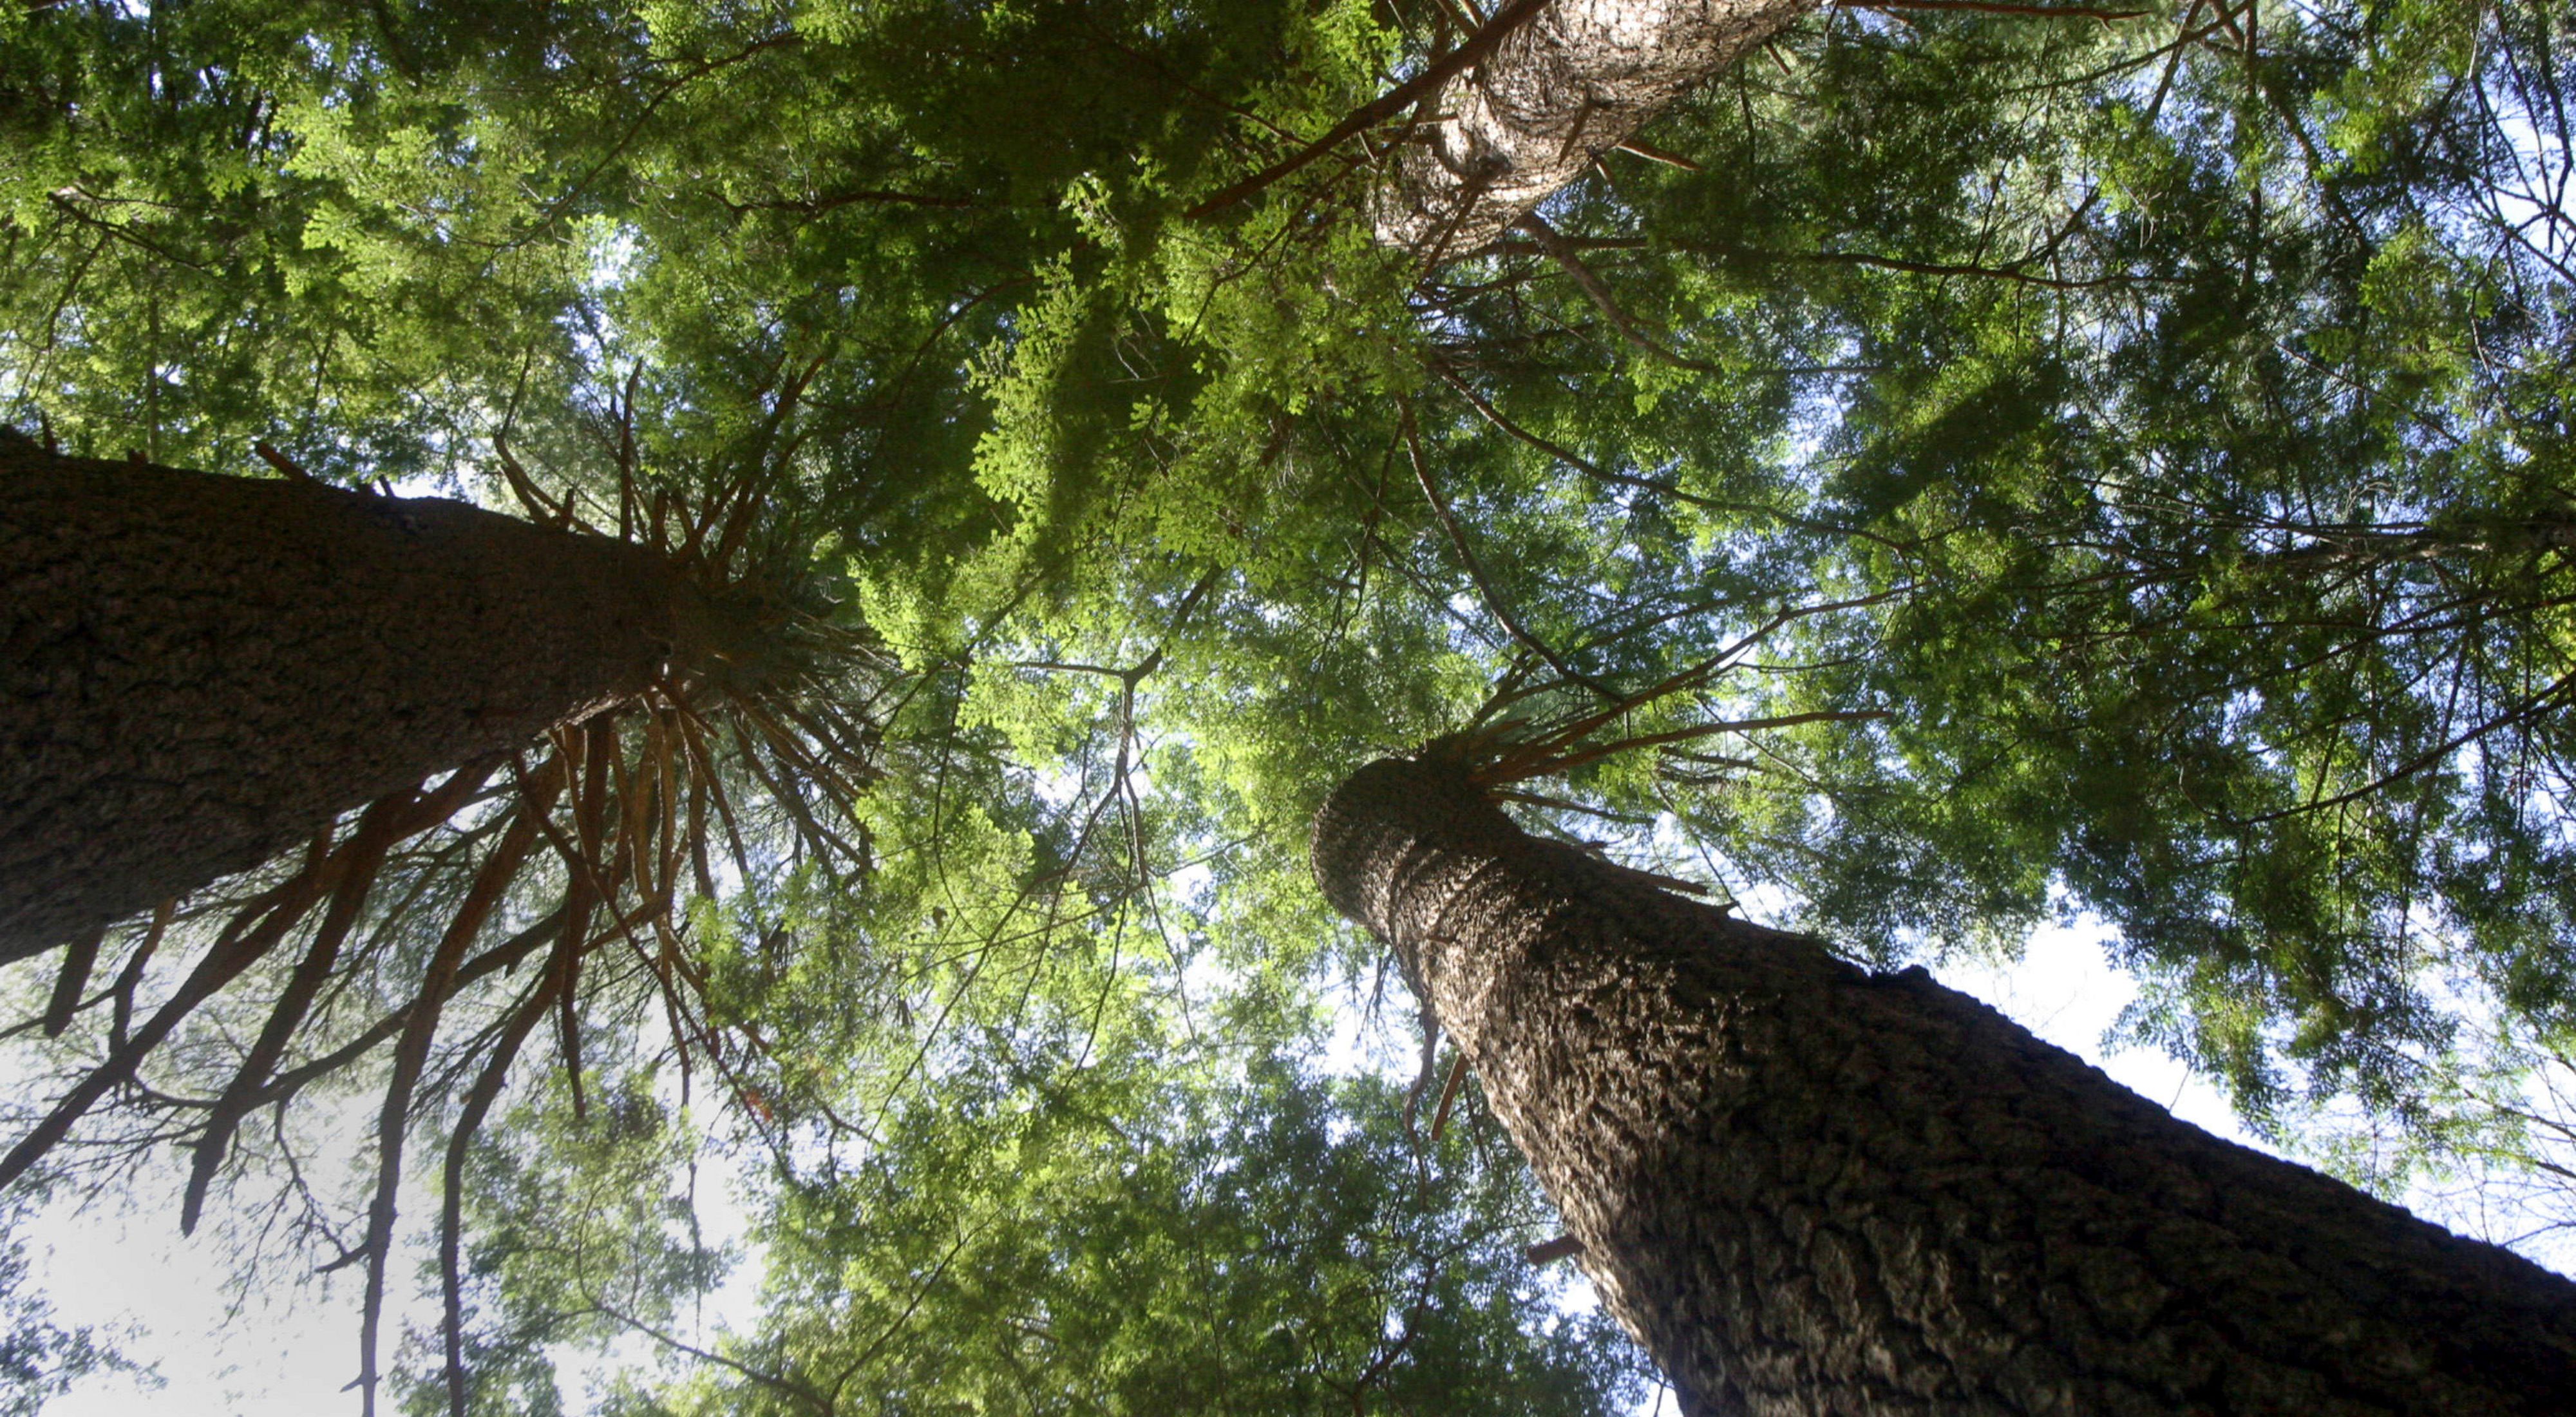 Photo of trees, looking up into a canopy of white pines in a New Hampshire forest.